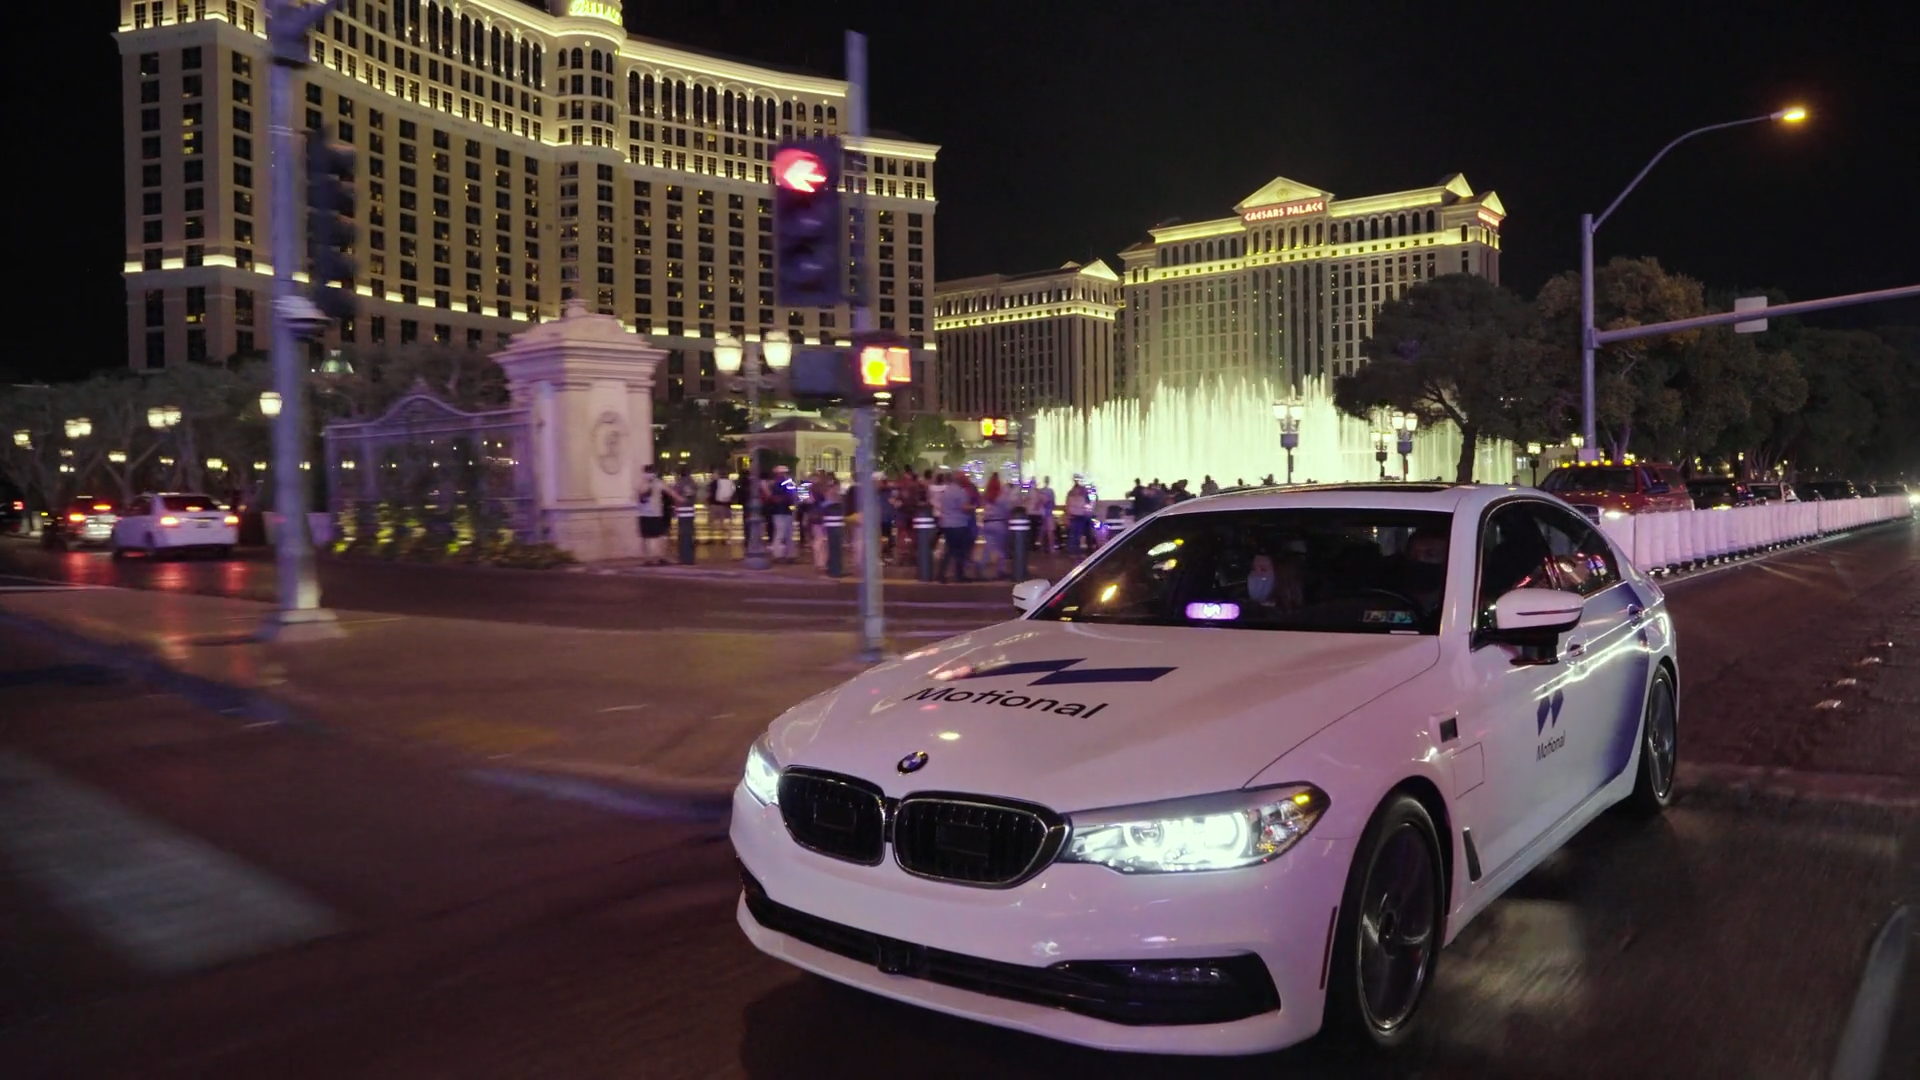 A white Motional vehicle seen in front of the Bellagio fountains in Las Vegas 